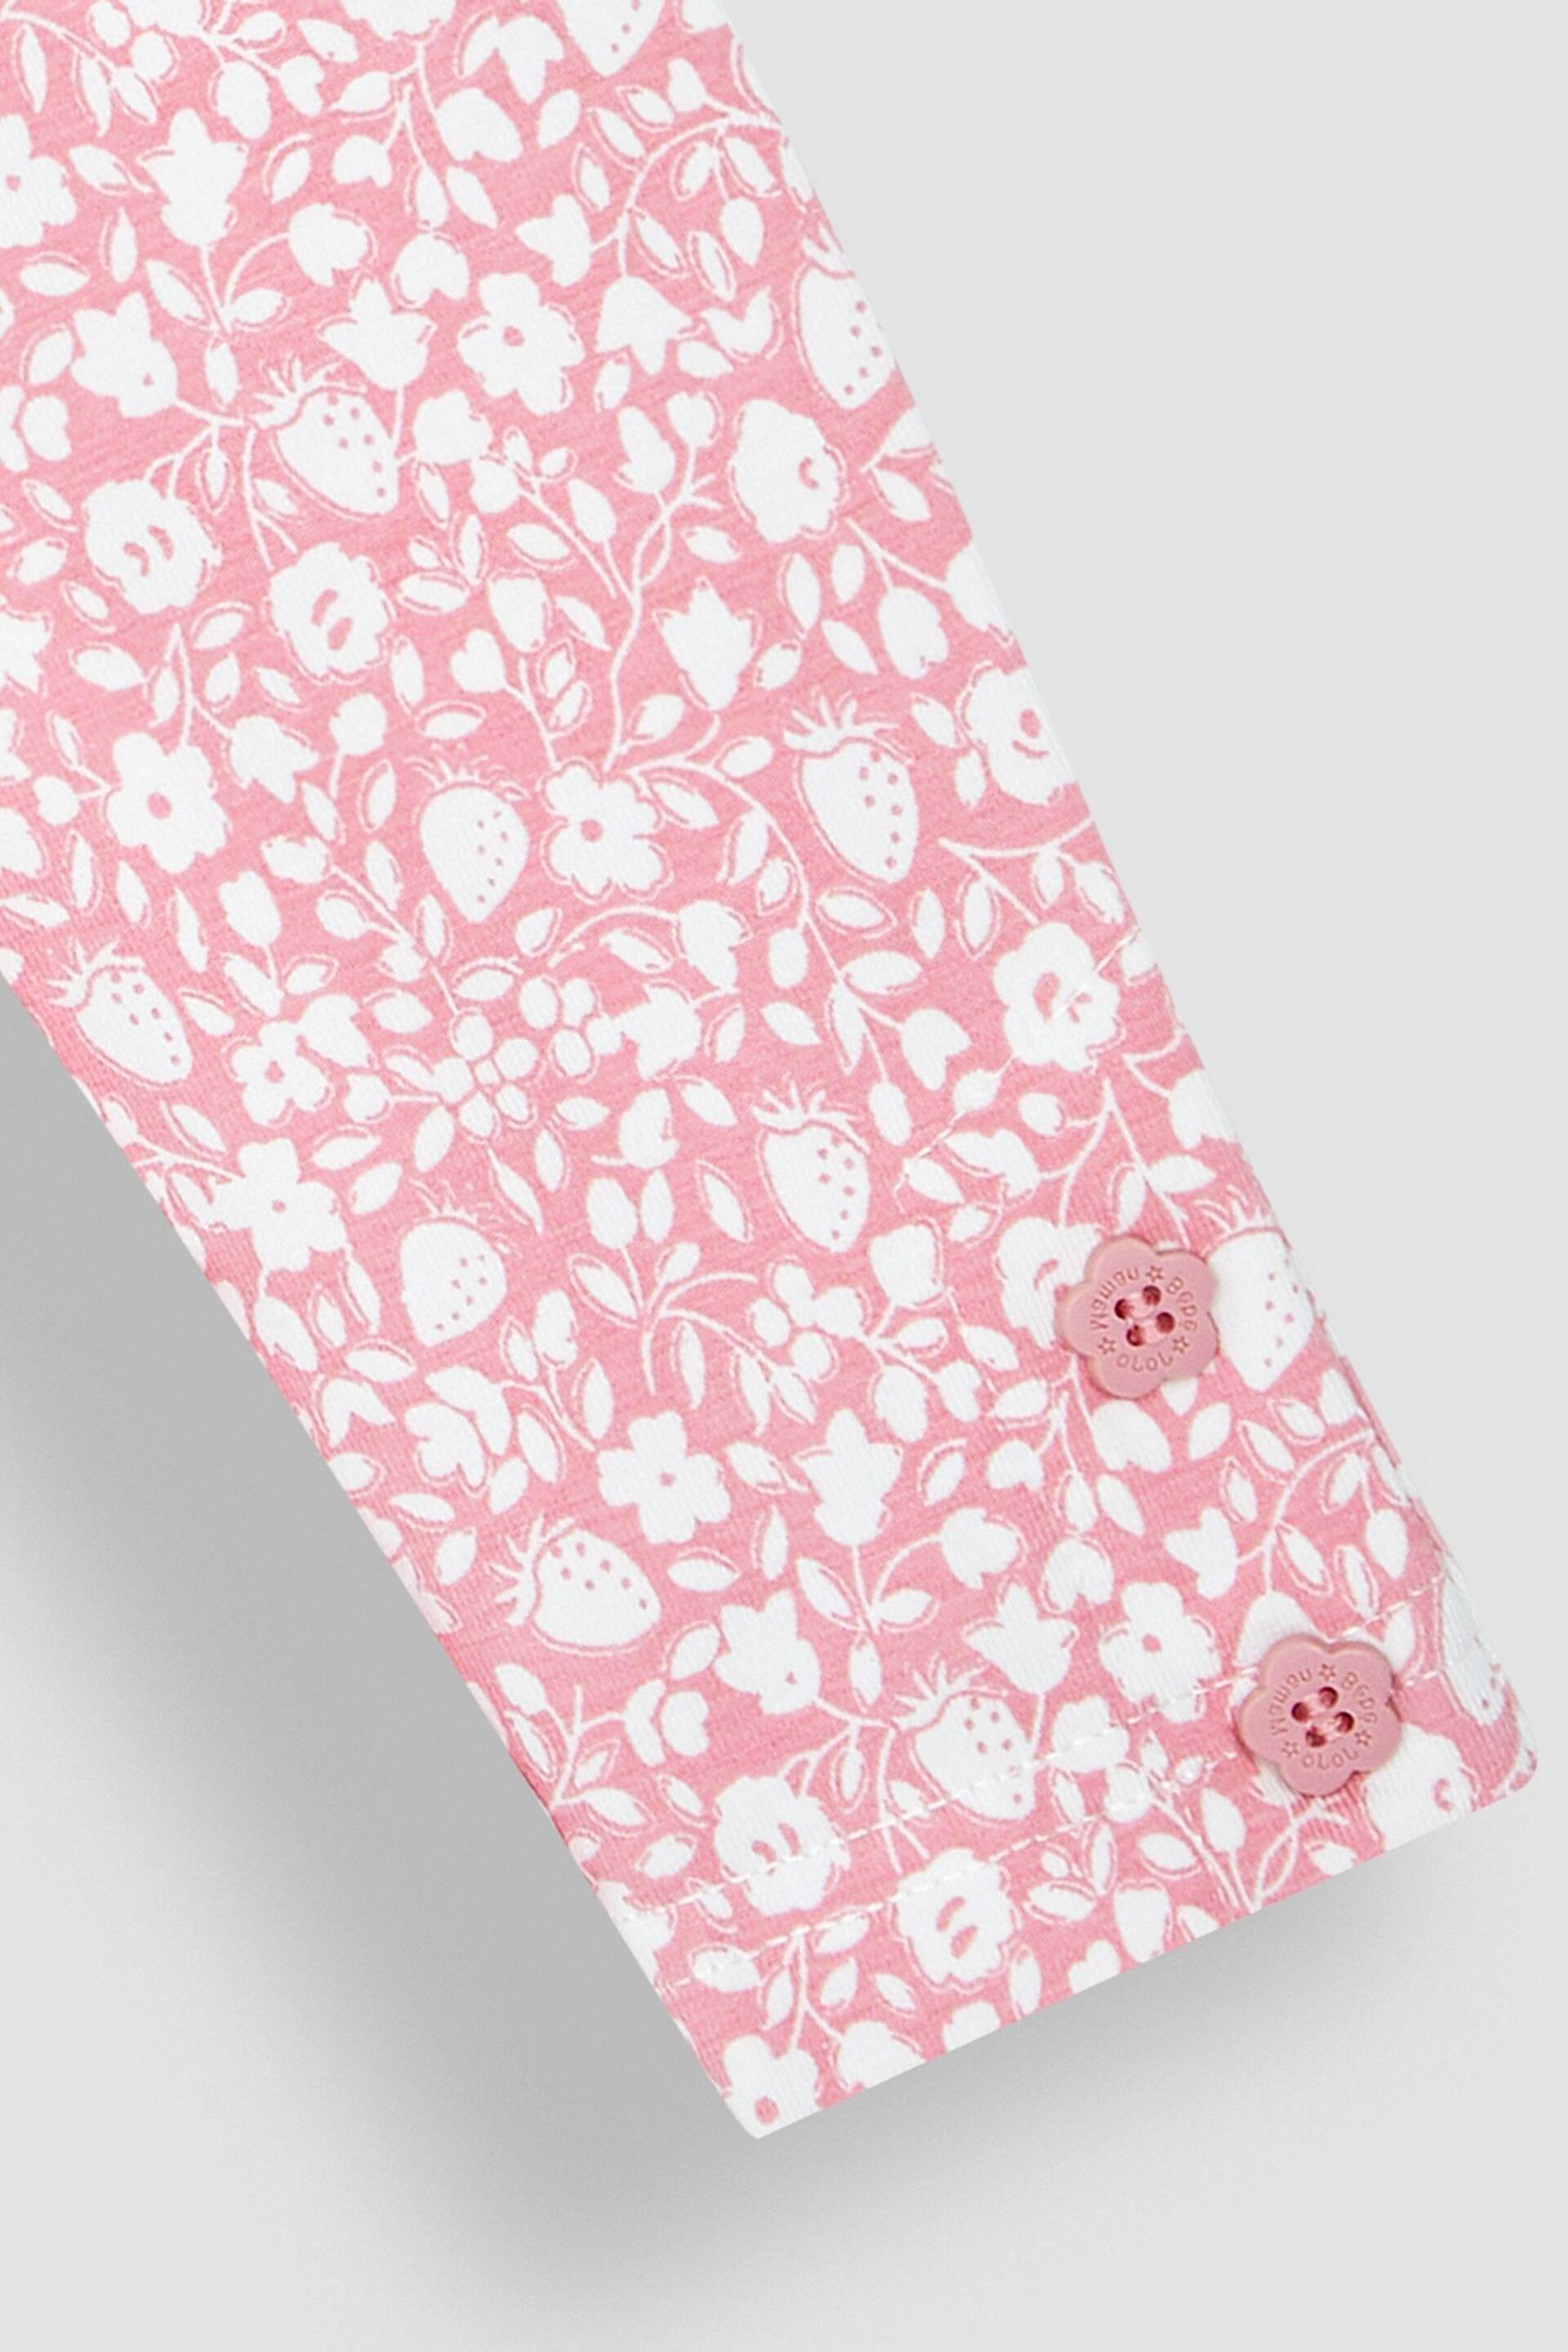 JoJo Maman Bébé Coral Strawberry Ditsy Floral & Pink 2-Pack Leggings - Image 4 of 6